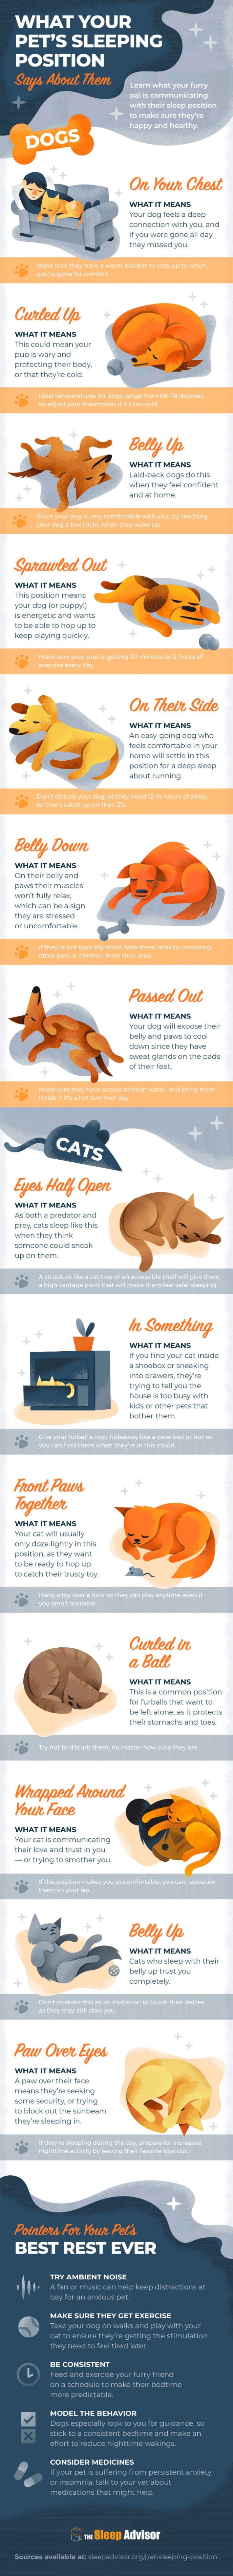 The Meaning of Cat and Dog Sleeping Positions